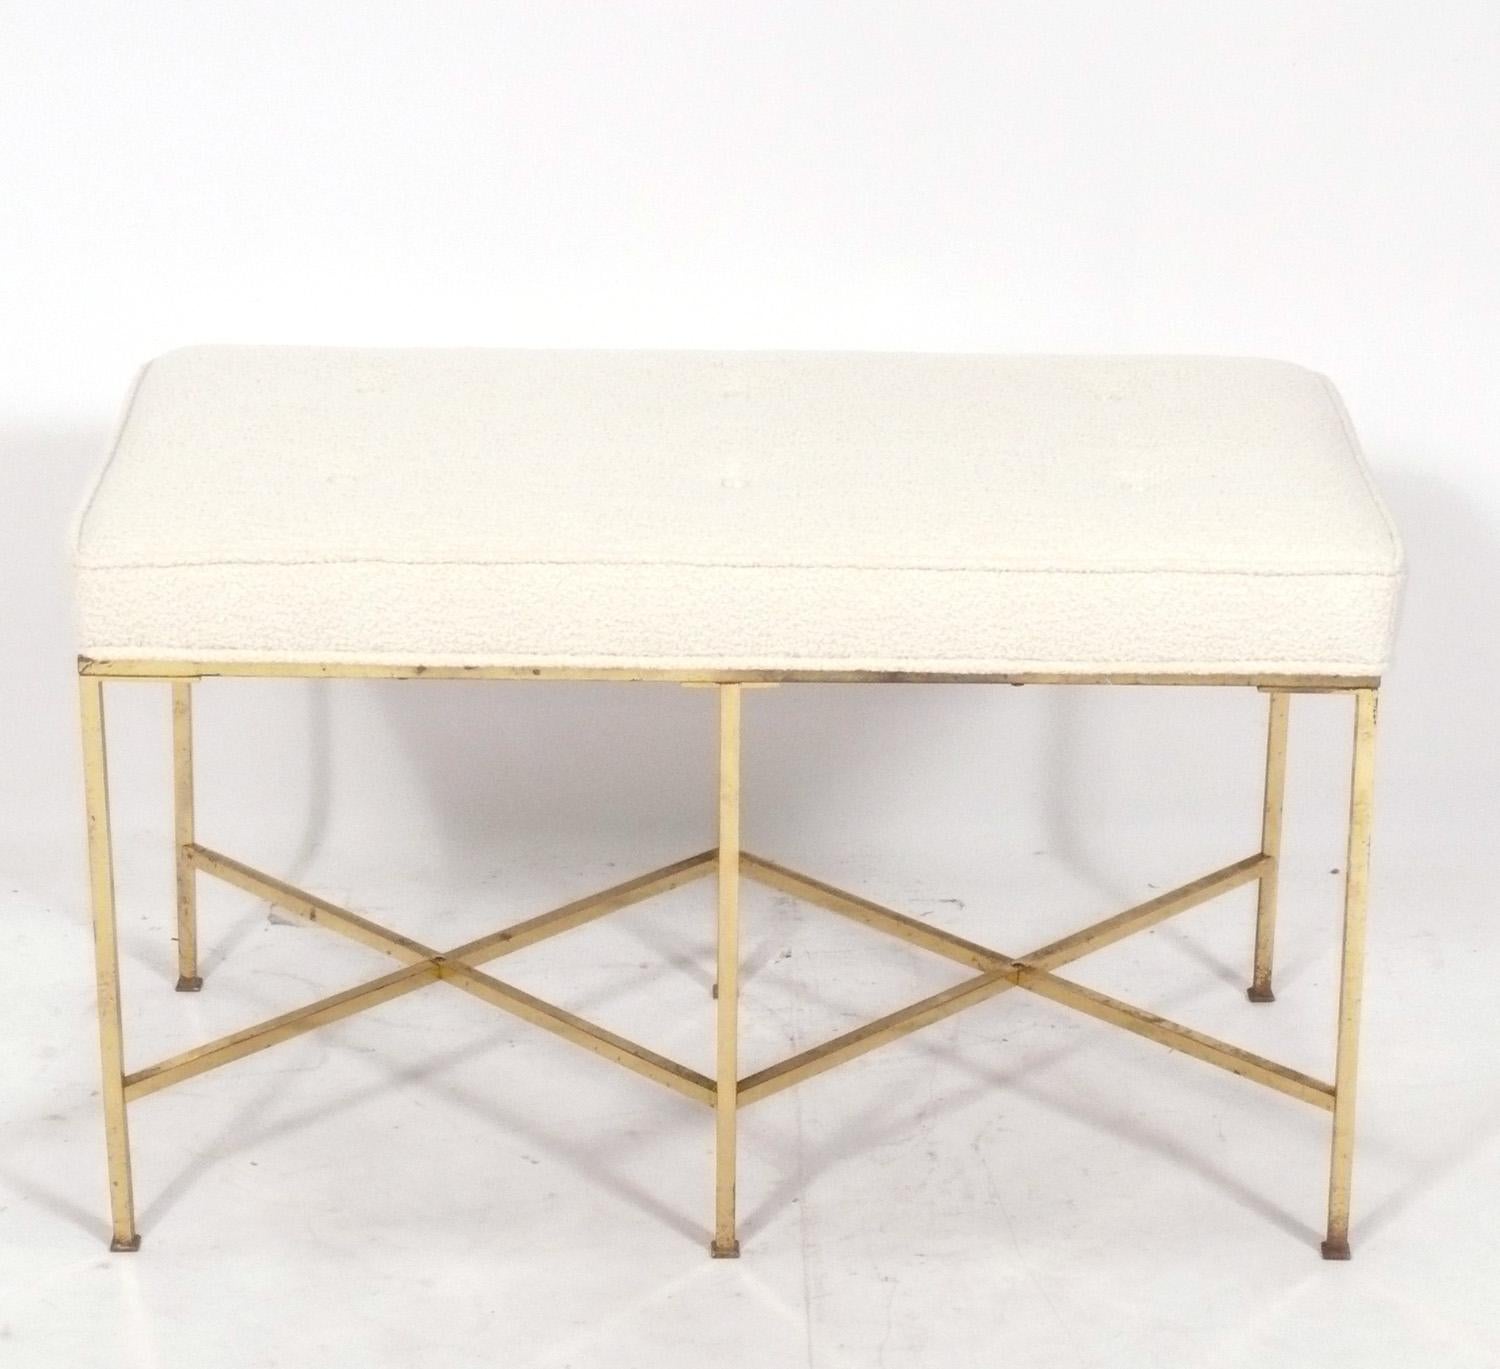 Sculptural X-based brass bench, in the manner of Paul McCobb, American, circa 1950s. It retains its original distressed patina to the base, and has been newly reupholstered in an ivory colored upholstery.